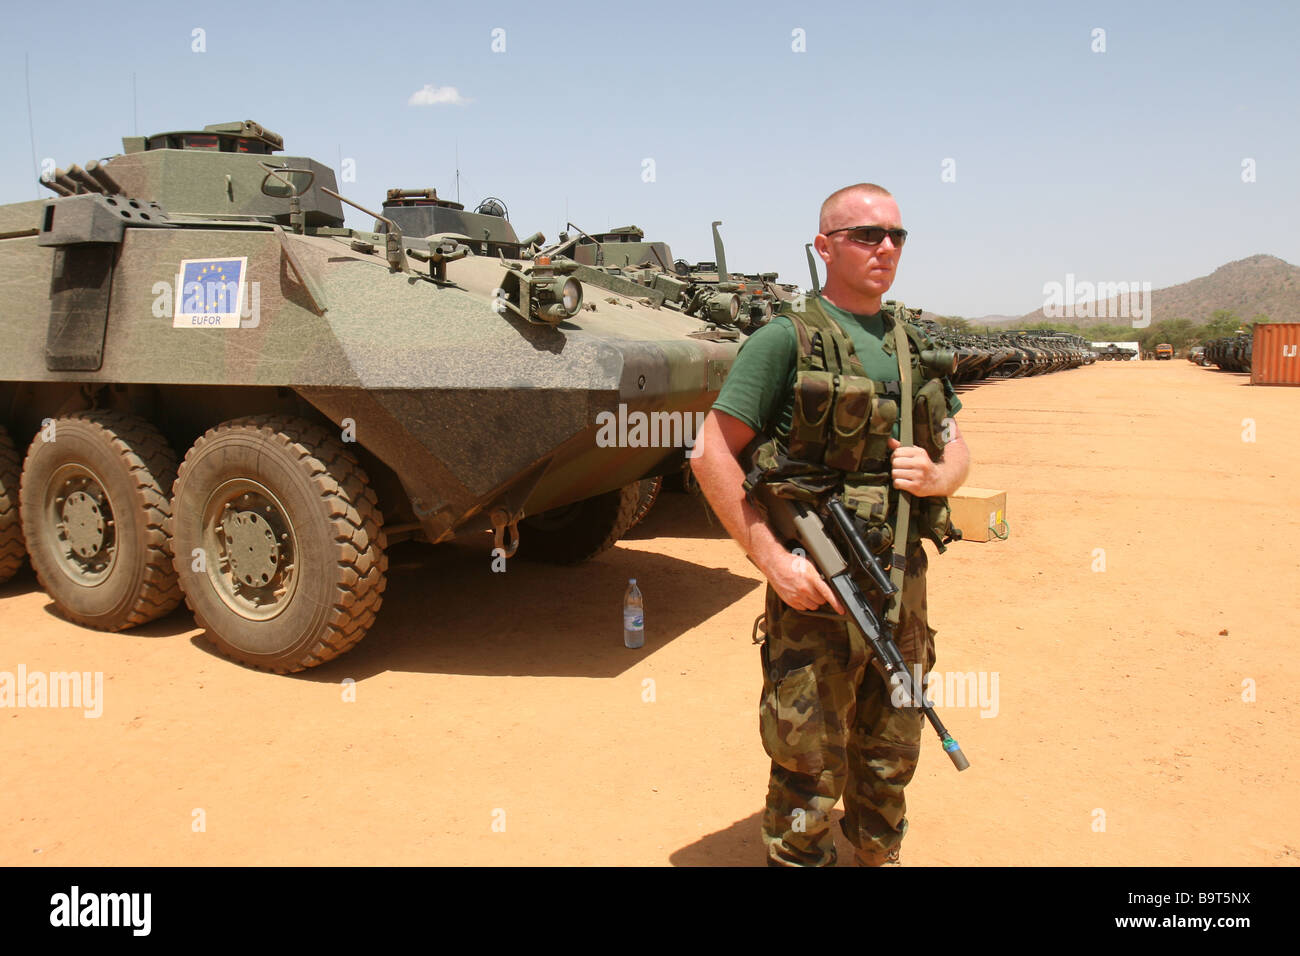 Irish Army soldier on duty in Chad, Africa as part of the EUFOR mission to protest refugees from neighboring Darfur in Sudan Stock Photo